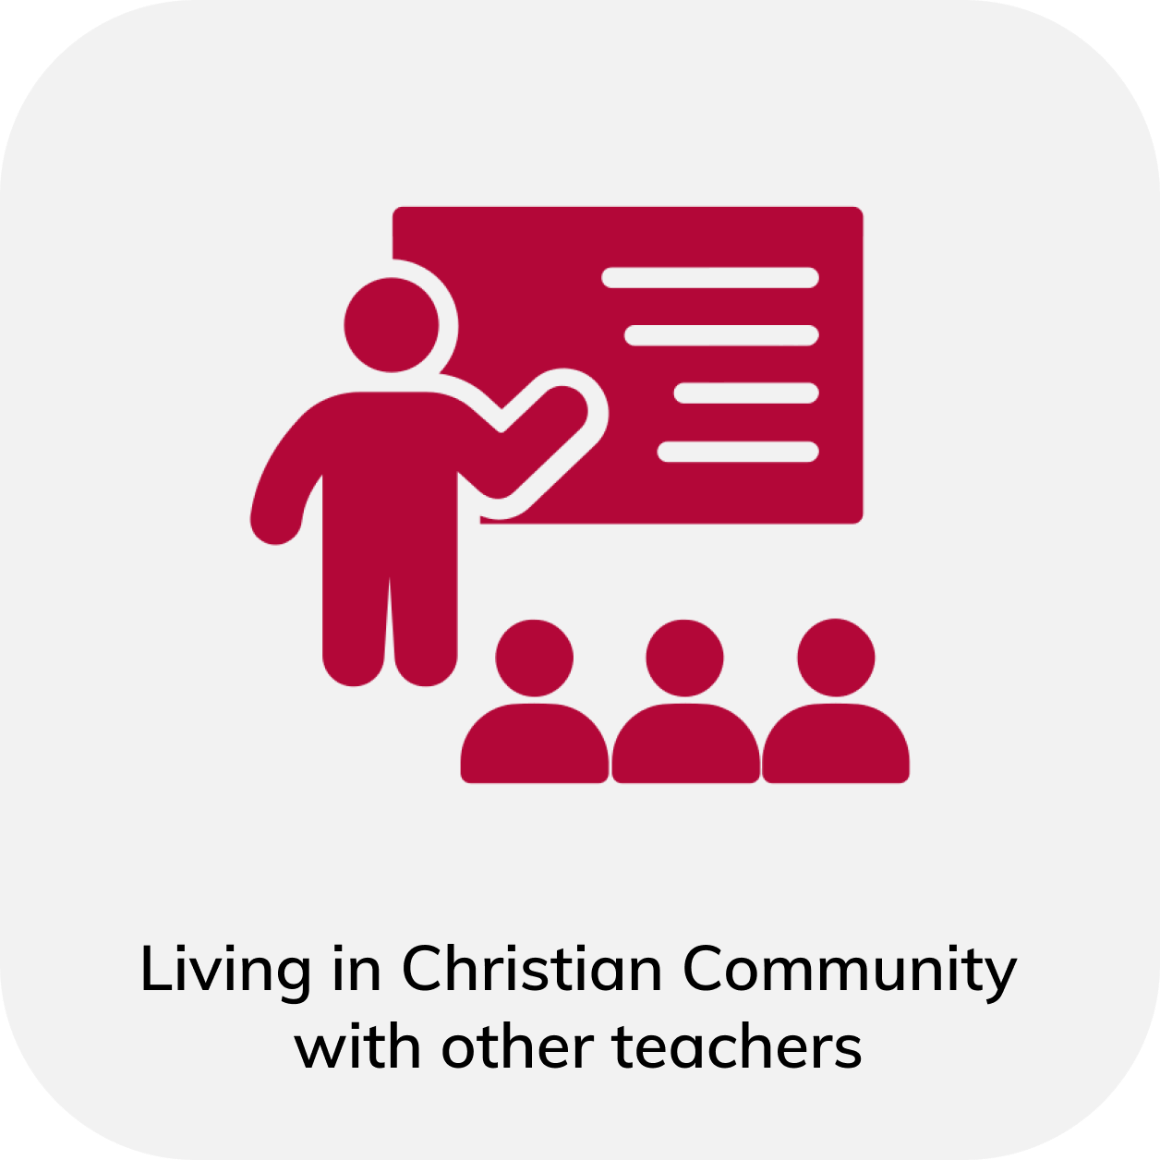 Living in Christian Community with other teachers